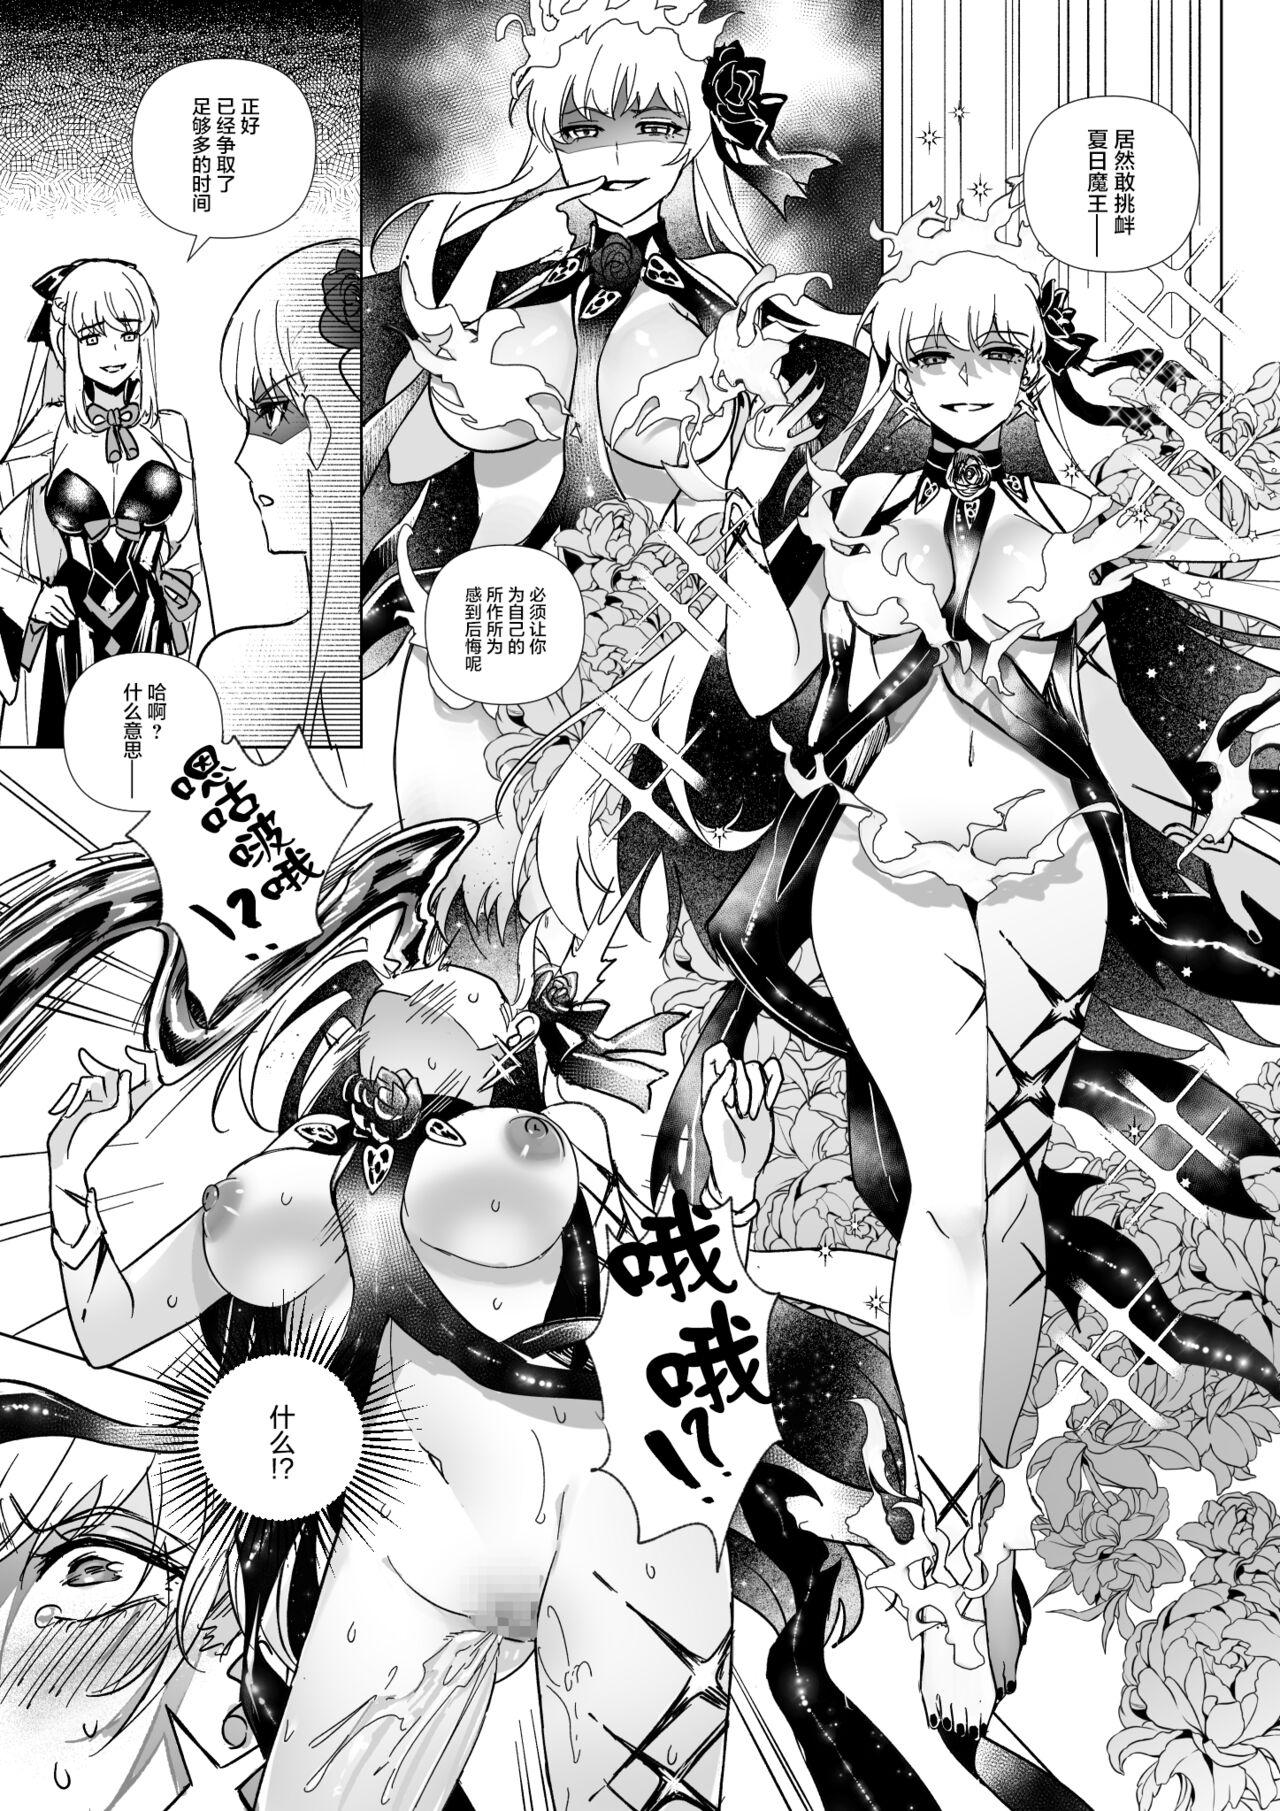 Family Roleplay FGO モルガン&水着カーマ憑依 - Fate grand order Leaked - Page 7